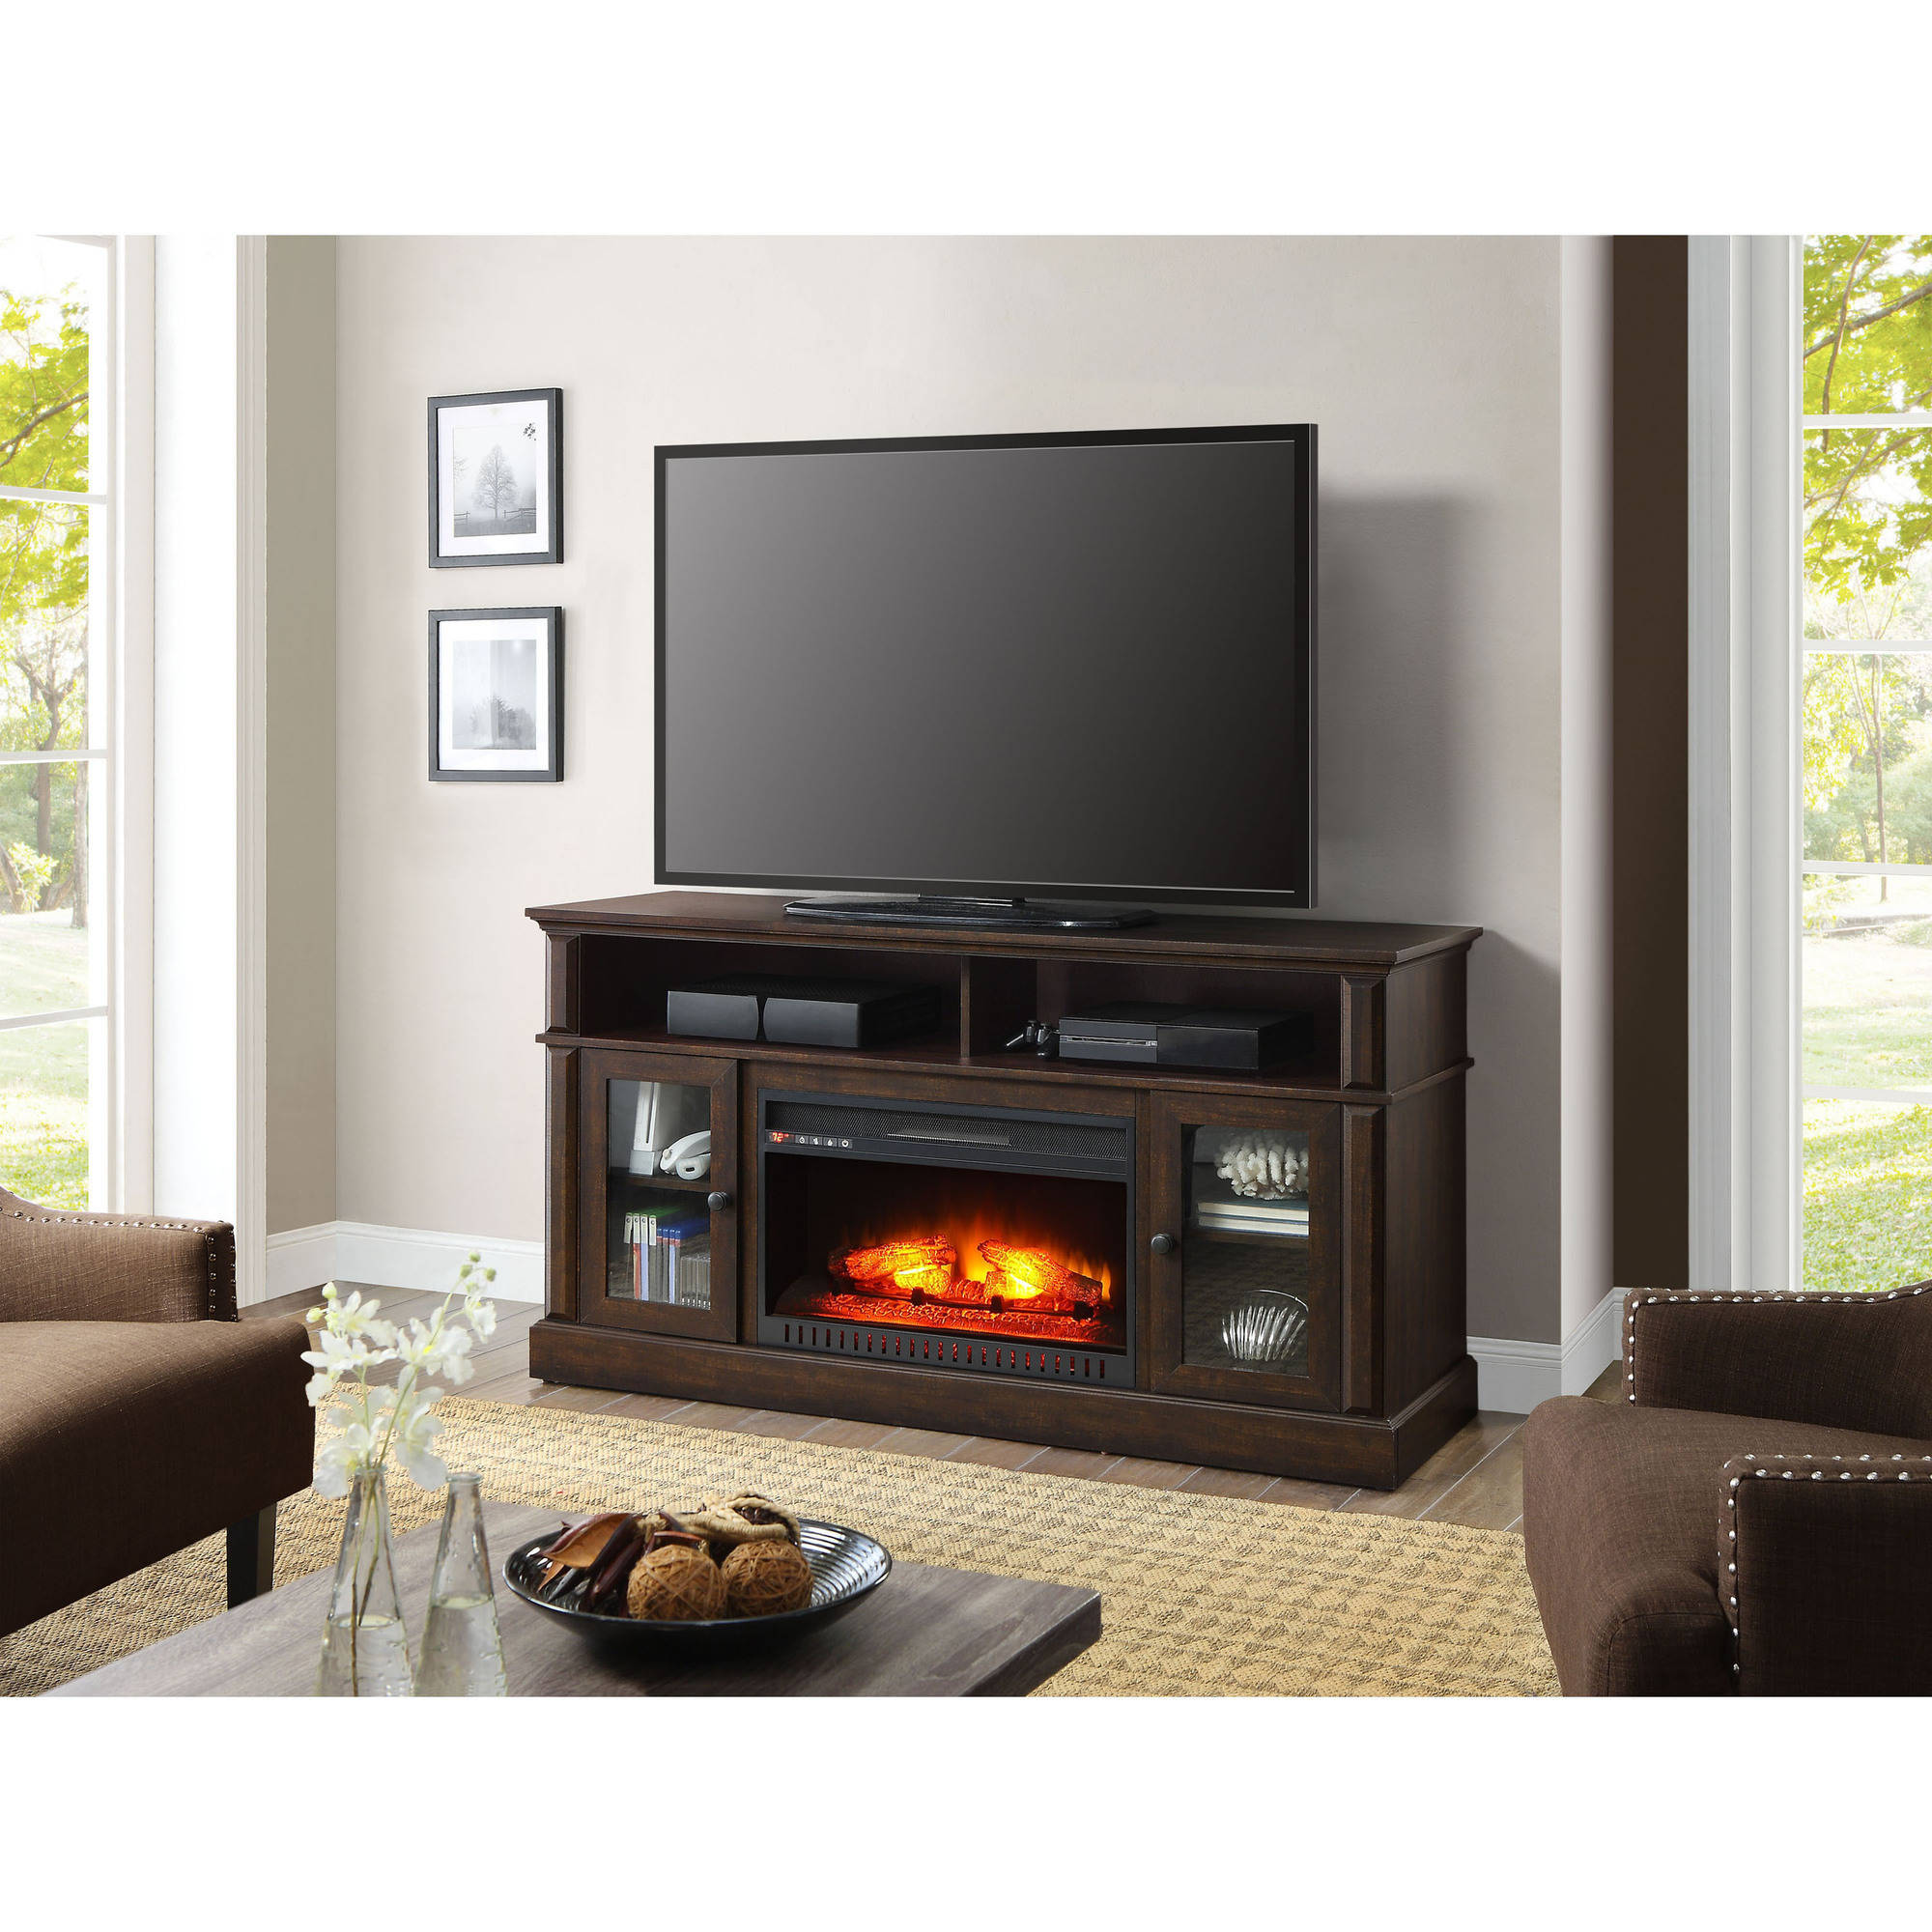 55 Inch Electric Fireplace Fresh Whalen Barston Media Fireplace for Tv S Up to 70 Multiple